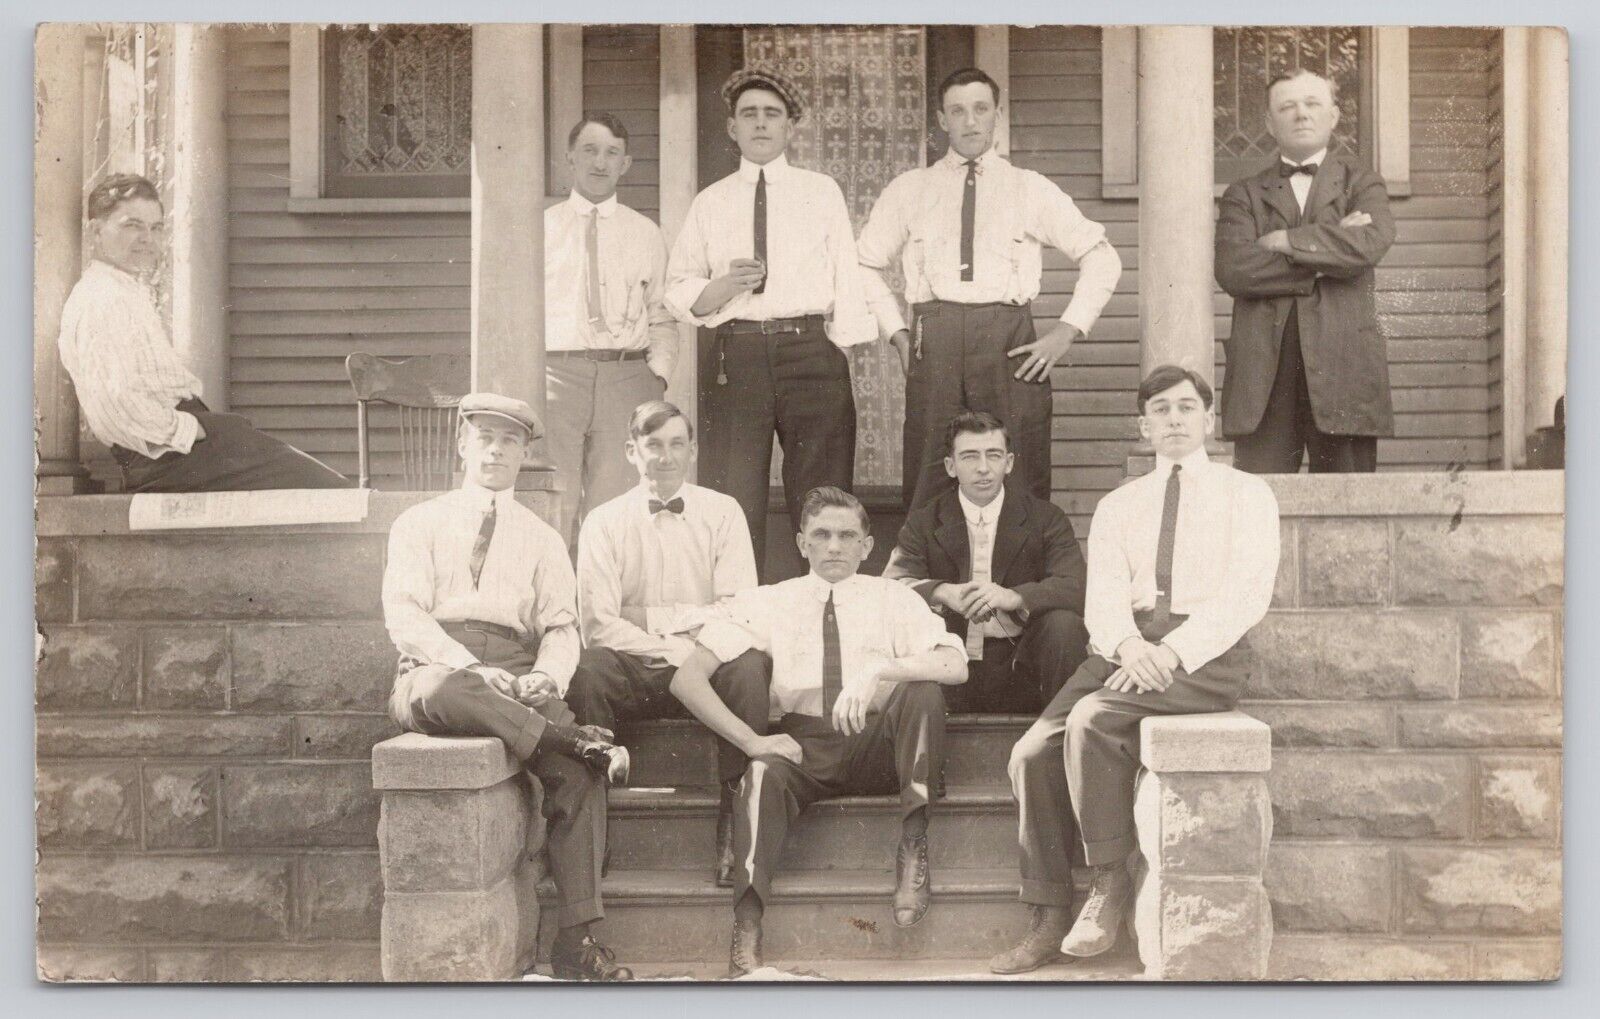 Unidentified Group of Groomed Men with Ties Posing on Porch c1920s RPPC Postcard